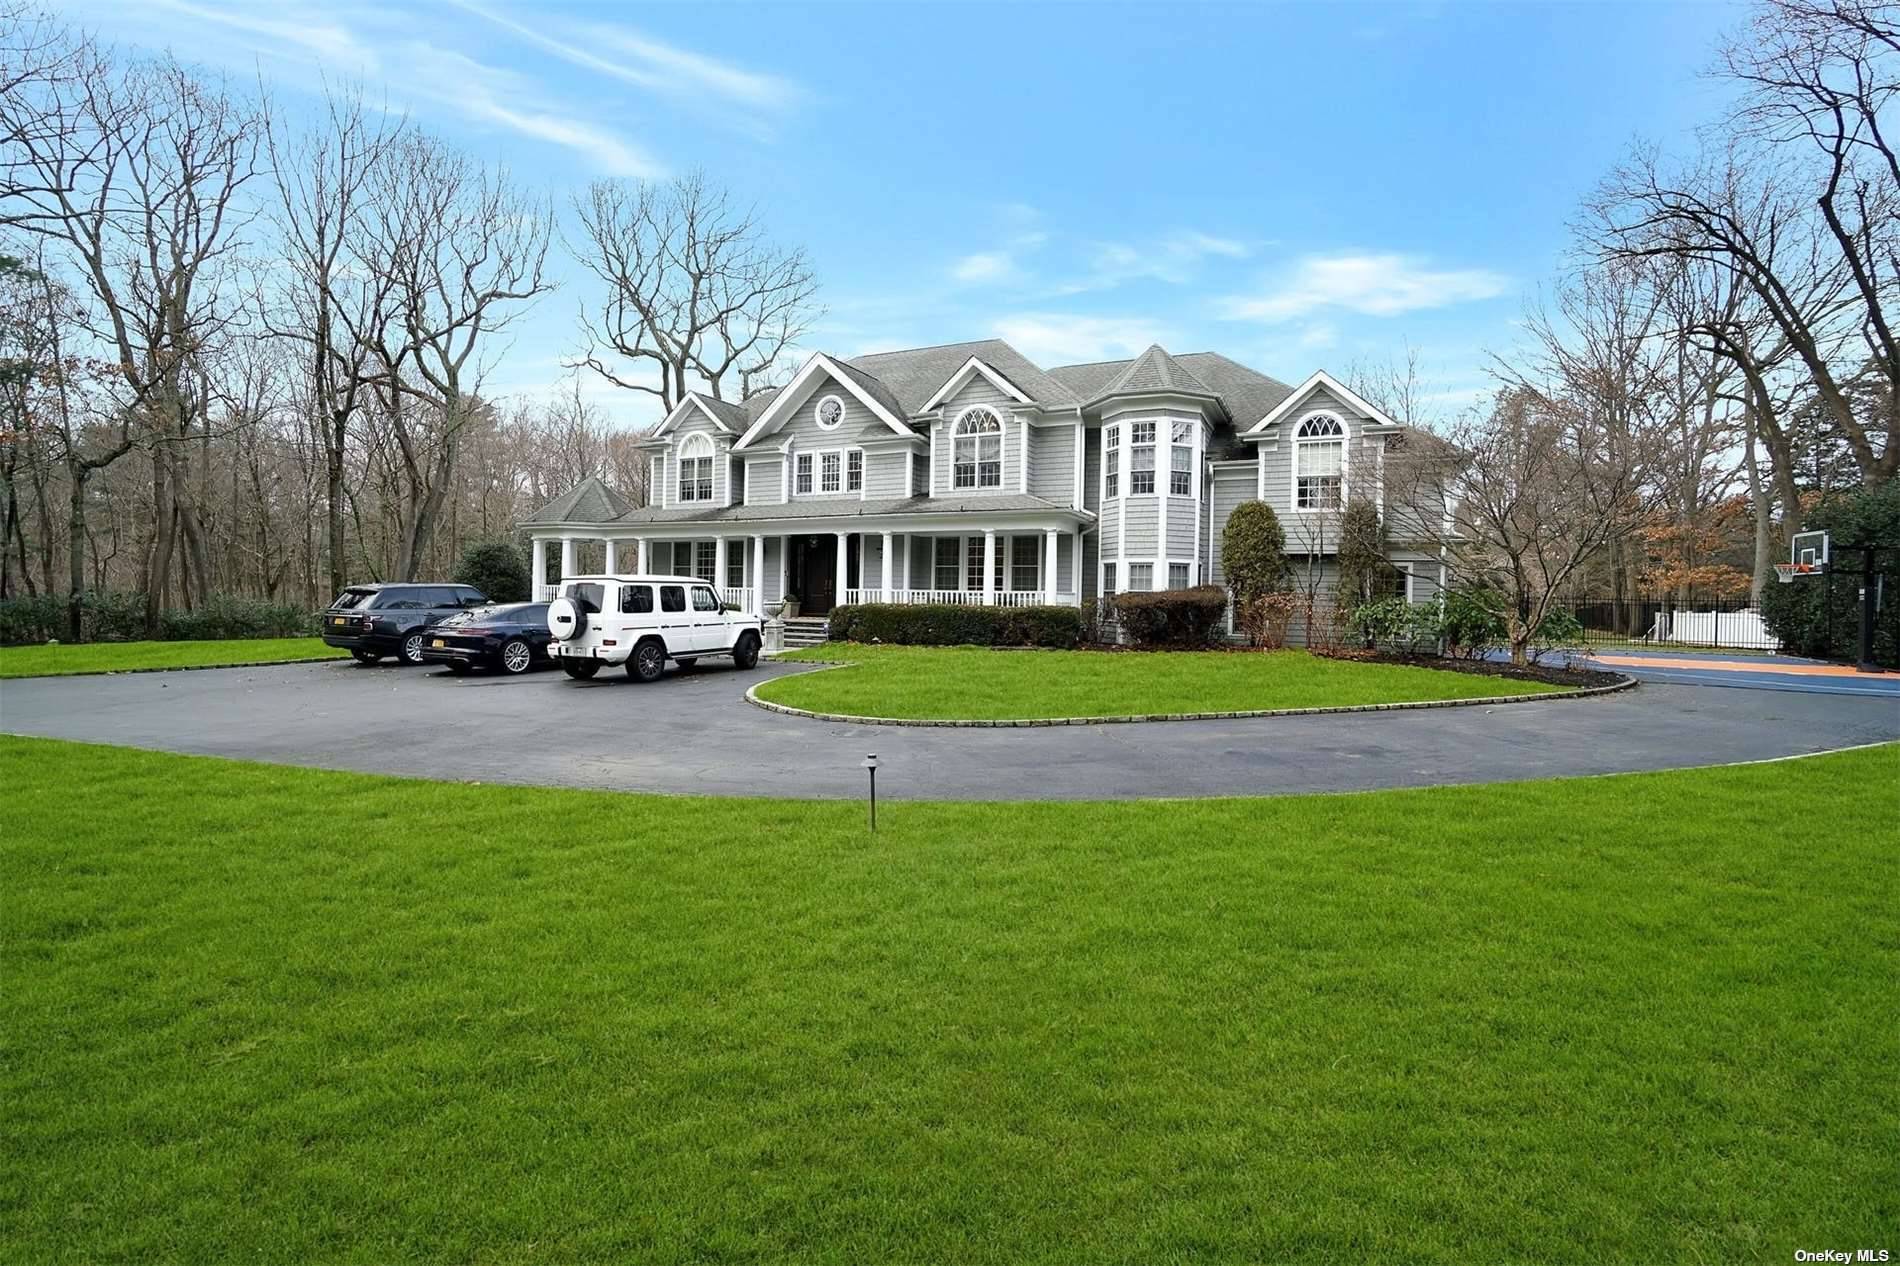 Majestically Situated On The North Shore Of Long Island In The Prestigious Gold Coast Village Of Muttontown, This Impressive Hampton Style Home Sits On Two Plus Park Like Acres.